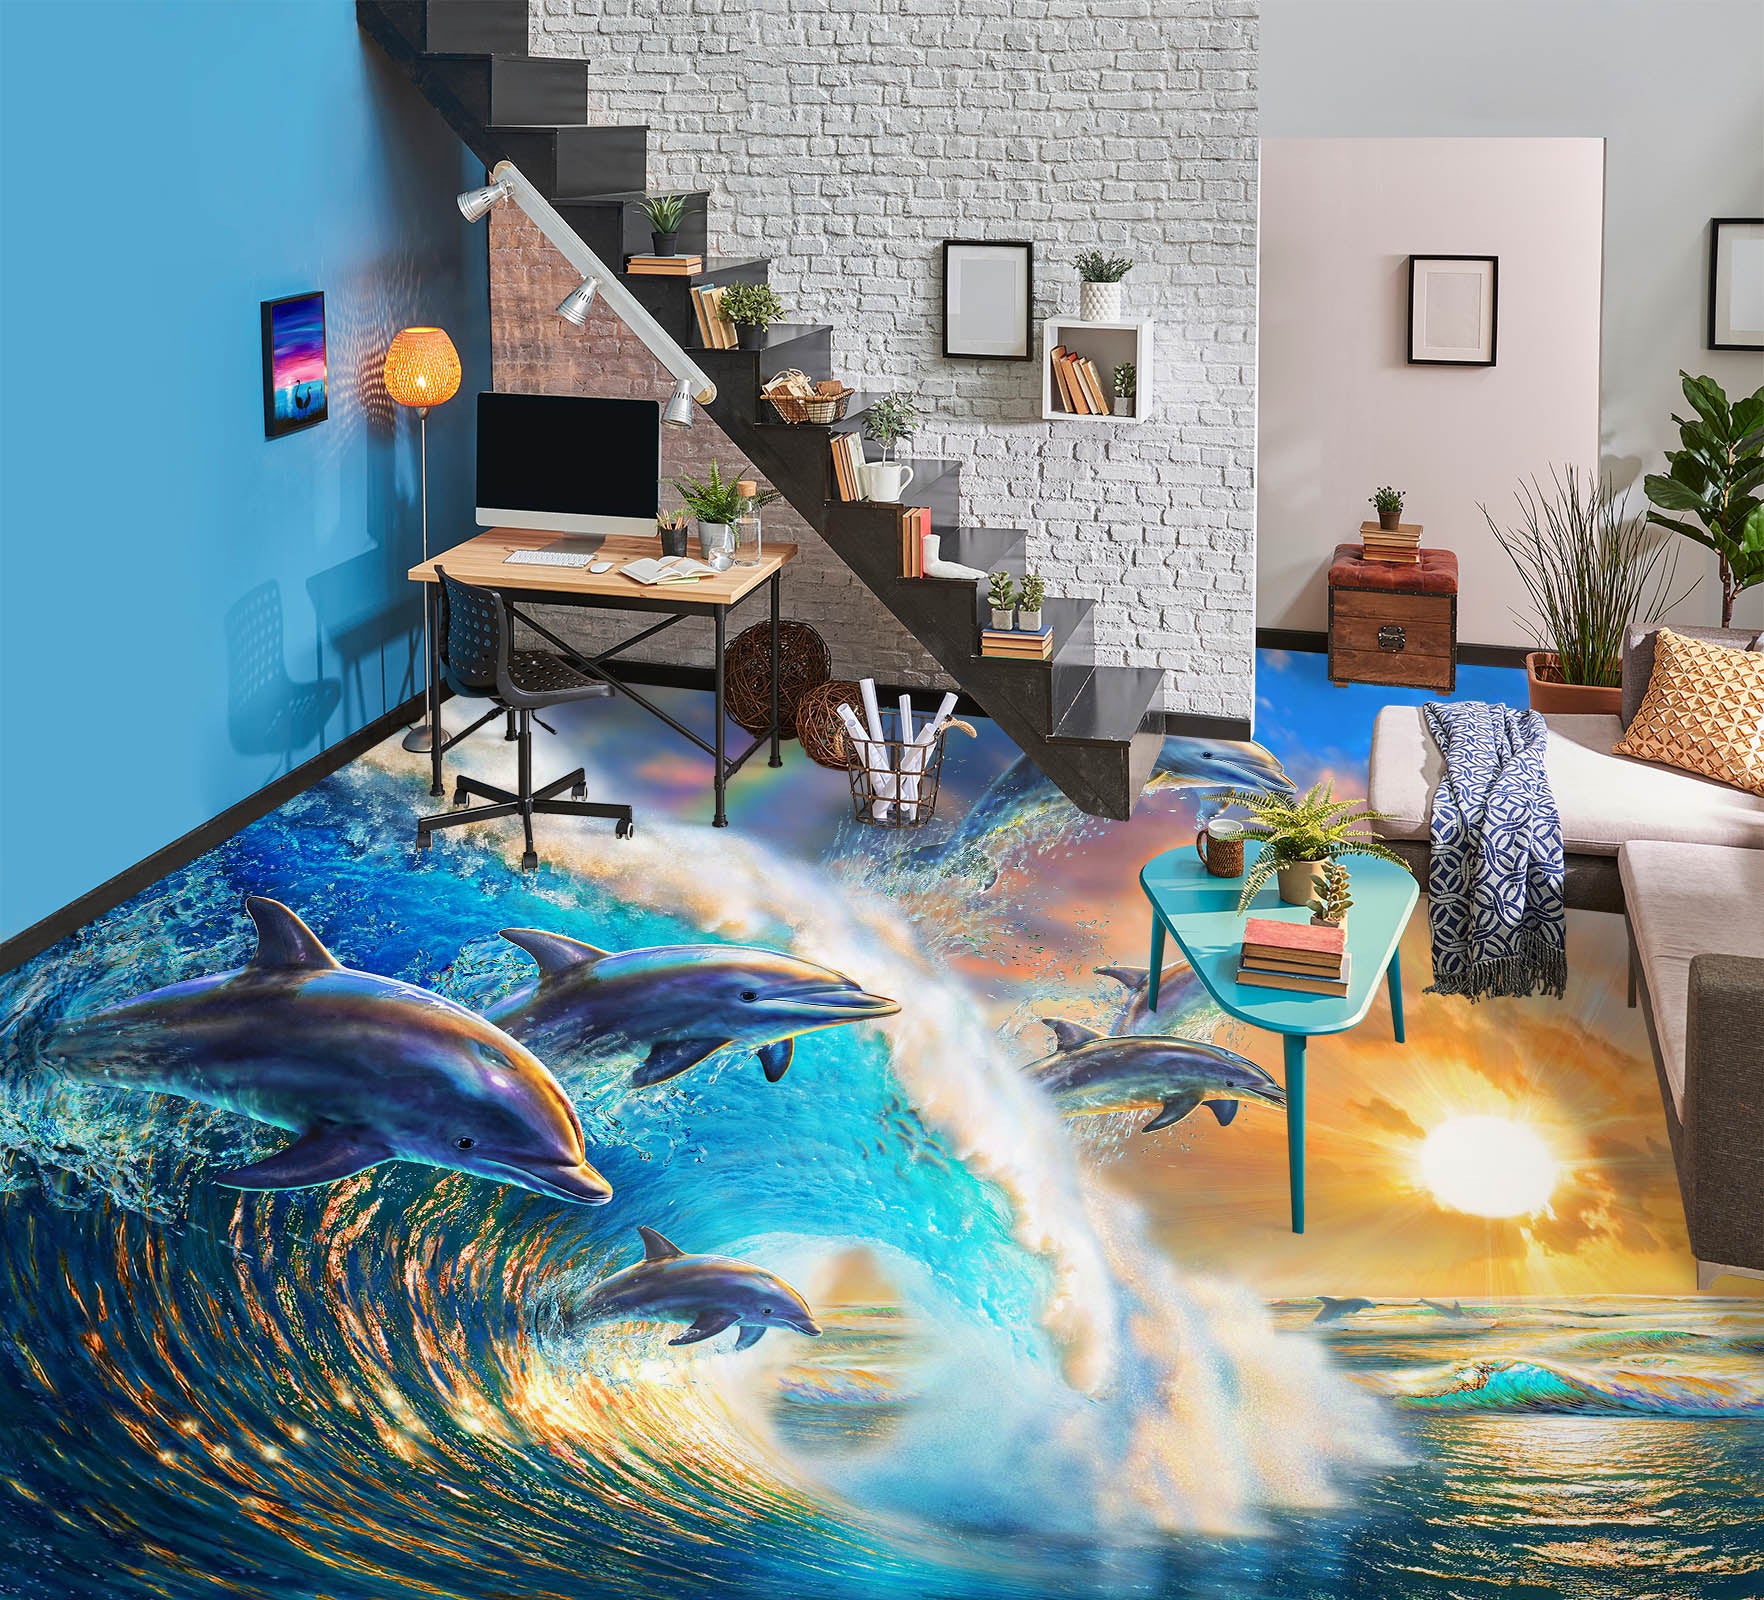 3D Dolphin Waves 98168 Adrian Chesterman Floor Mural  Wallpaper Murals Self-Adhesive Removable Print Epoxy